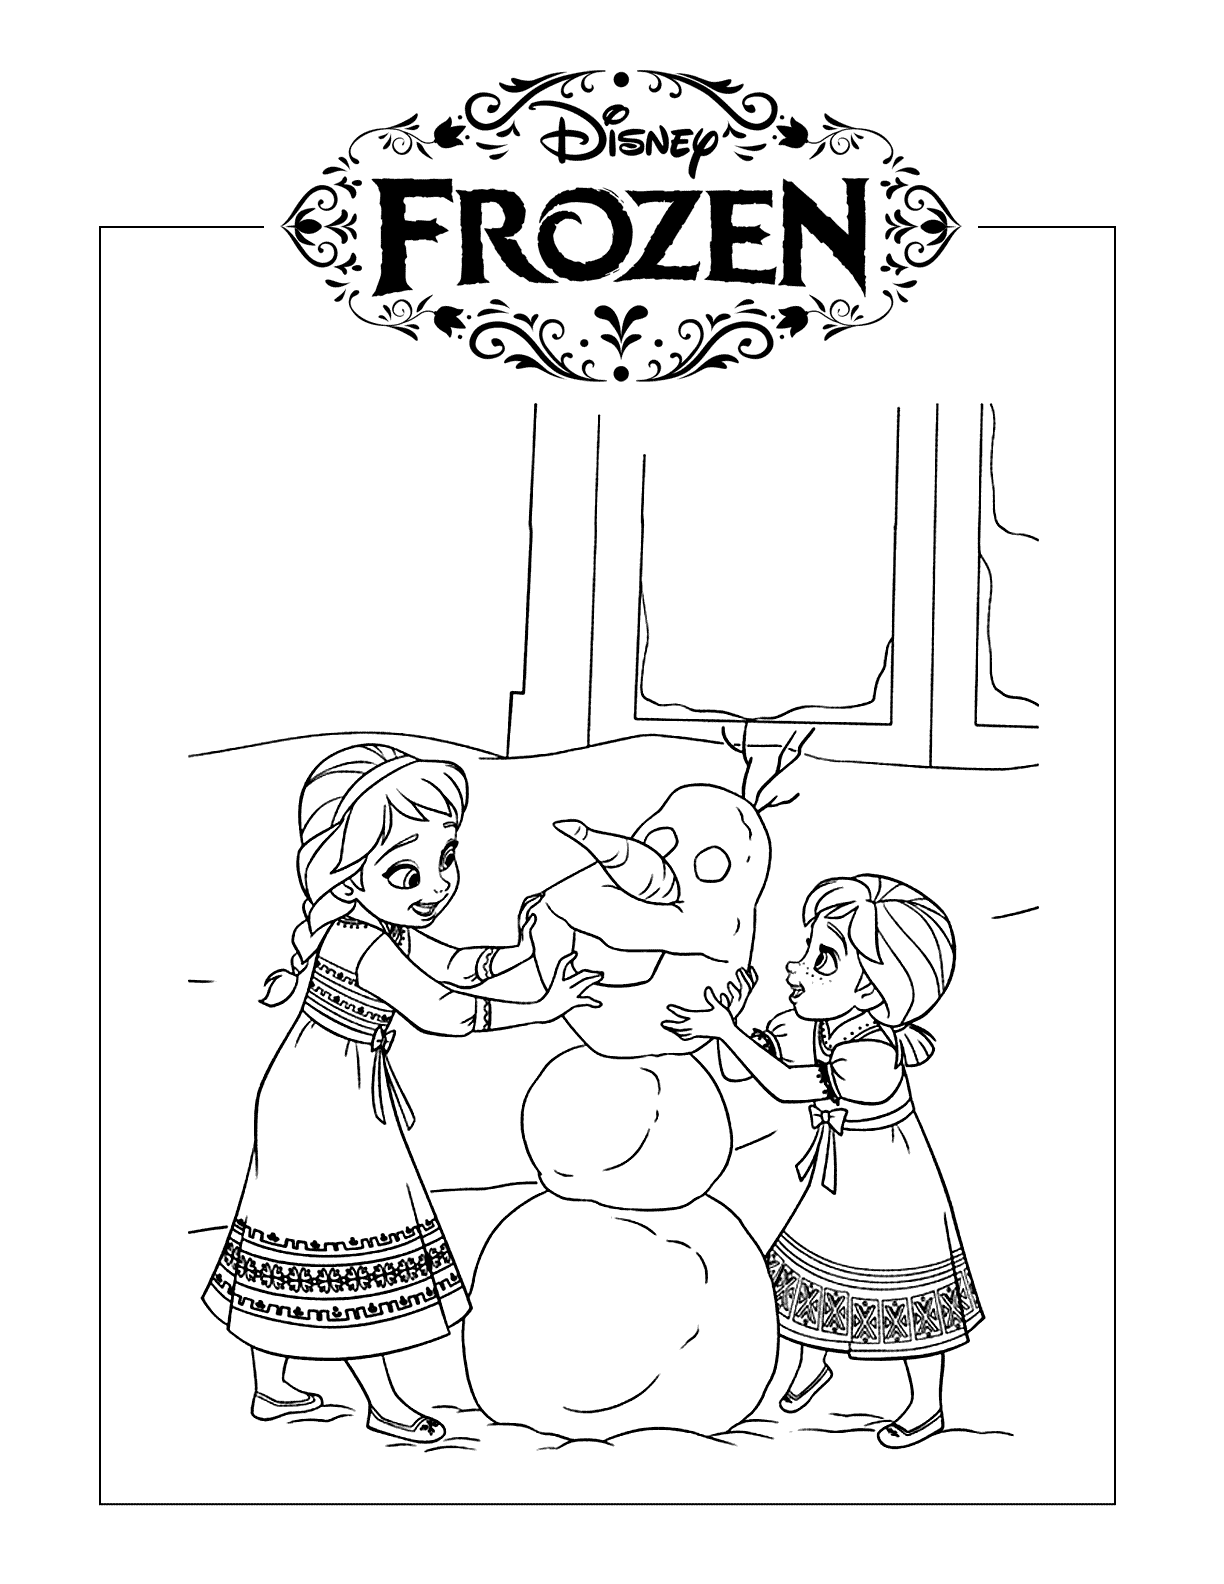 The Creation Of Olaf Coloring Page